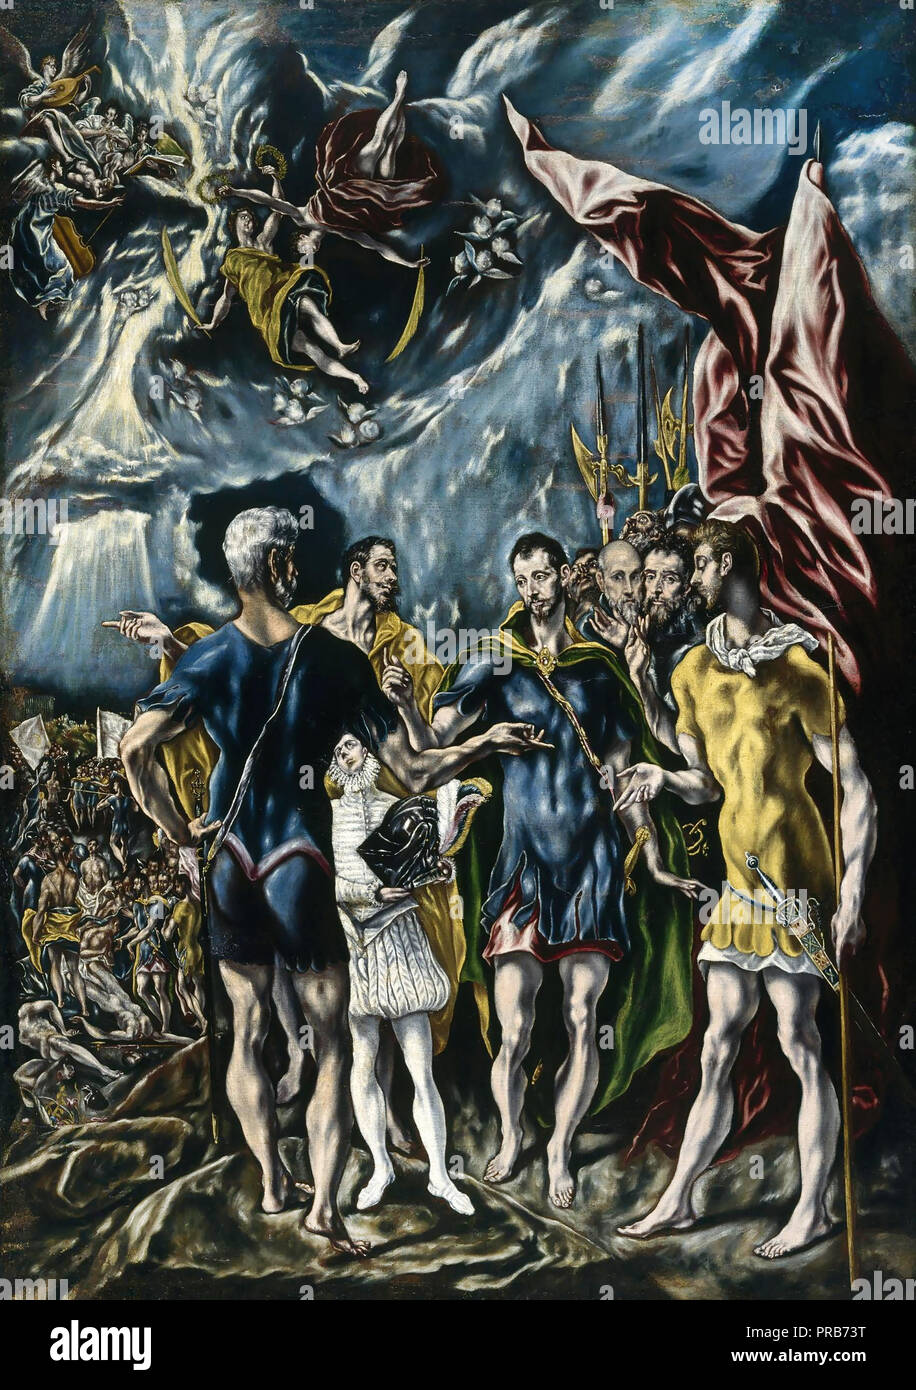 Jorge Manuel Theotocopoulos, The Martyrdom of Saint Maurice 1595-1630 Oil on canvas, Museum of Fine Arts, Houston, USA. Stock Photo